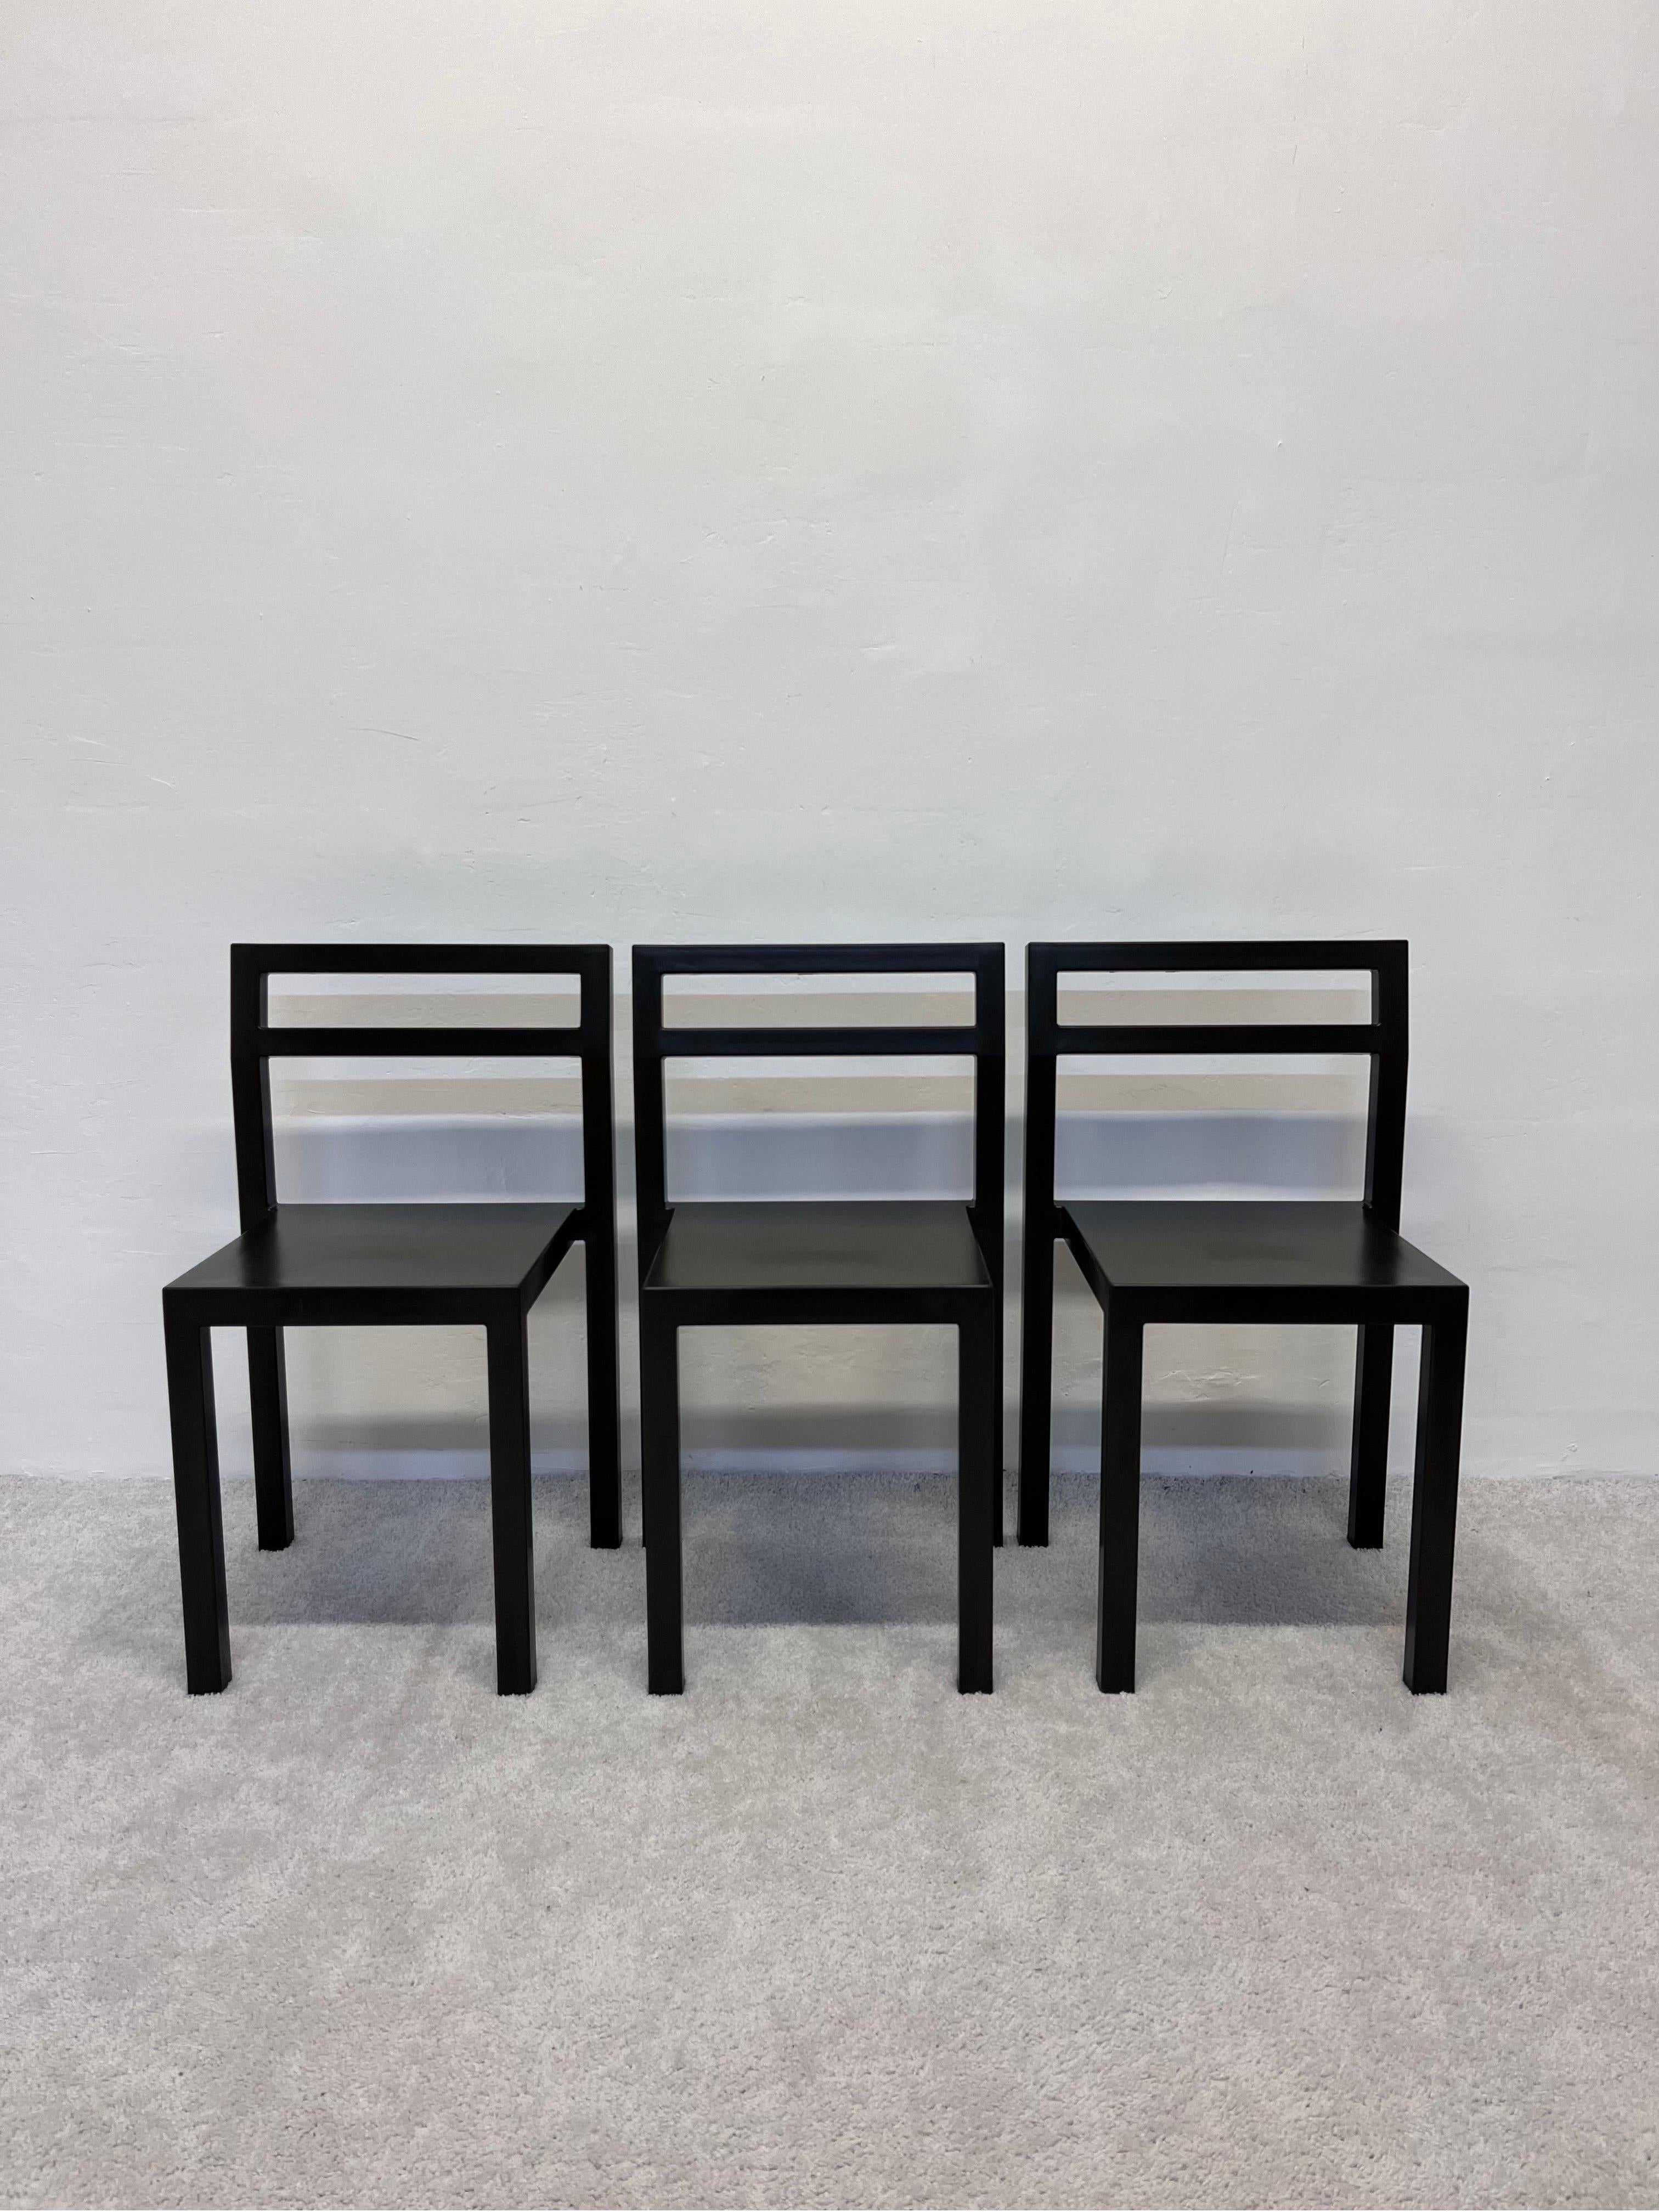 Three NON chairs in charcoal gray PUR-Rubber over a steel frame designed by Boris Berlin and Poul Christensen for Kallemo AB Sweden.

NON is a monoblock chair moulded in PUR-rubber in one shot. Geometrically straight yet comfortable, thanks to the